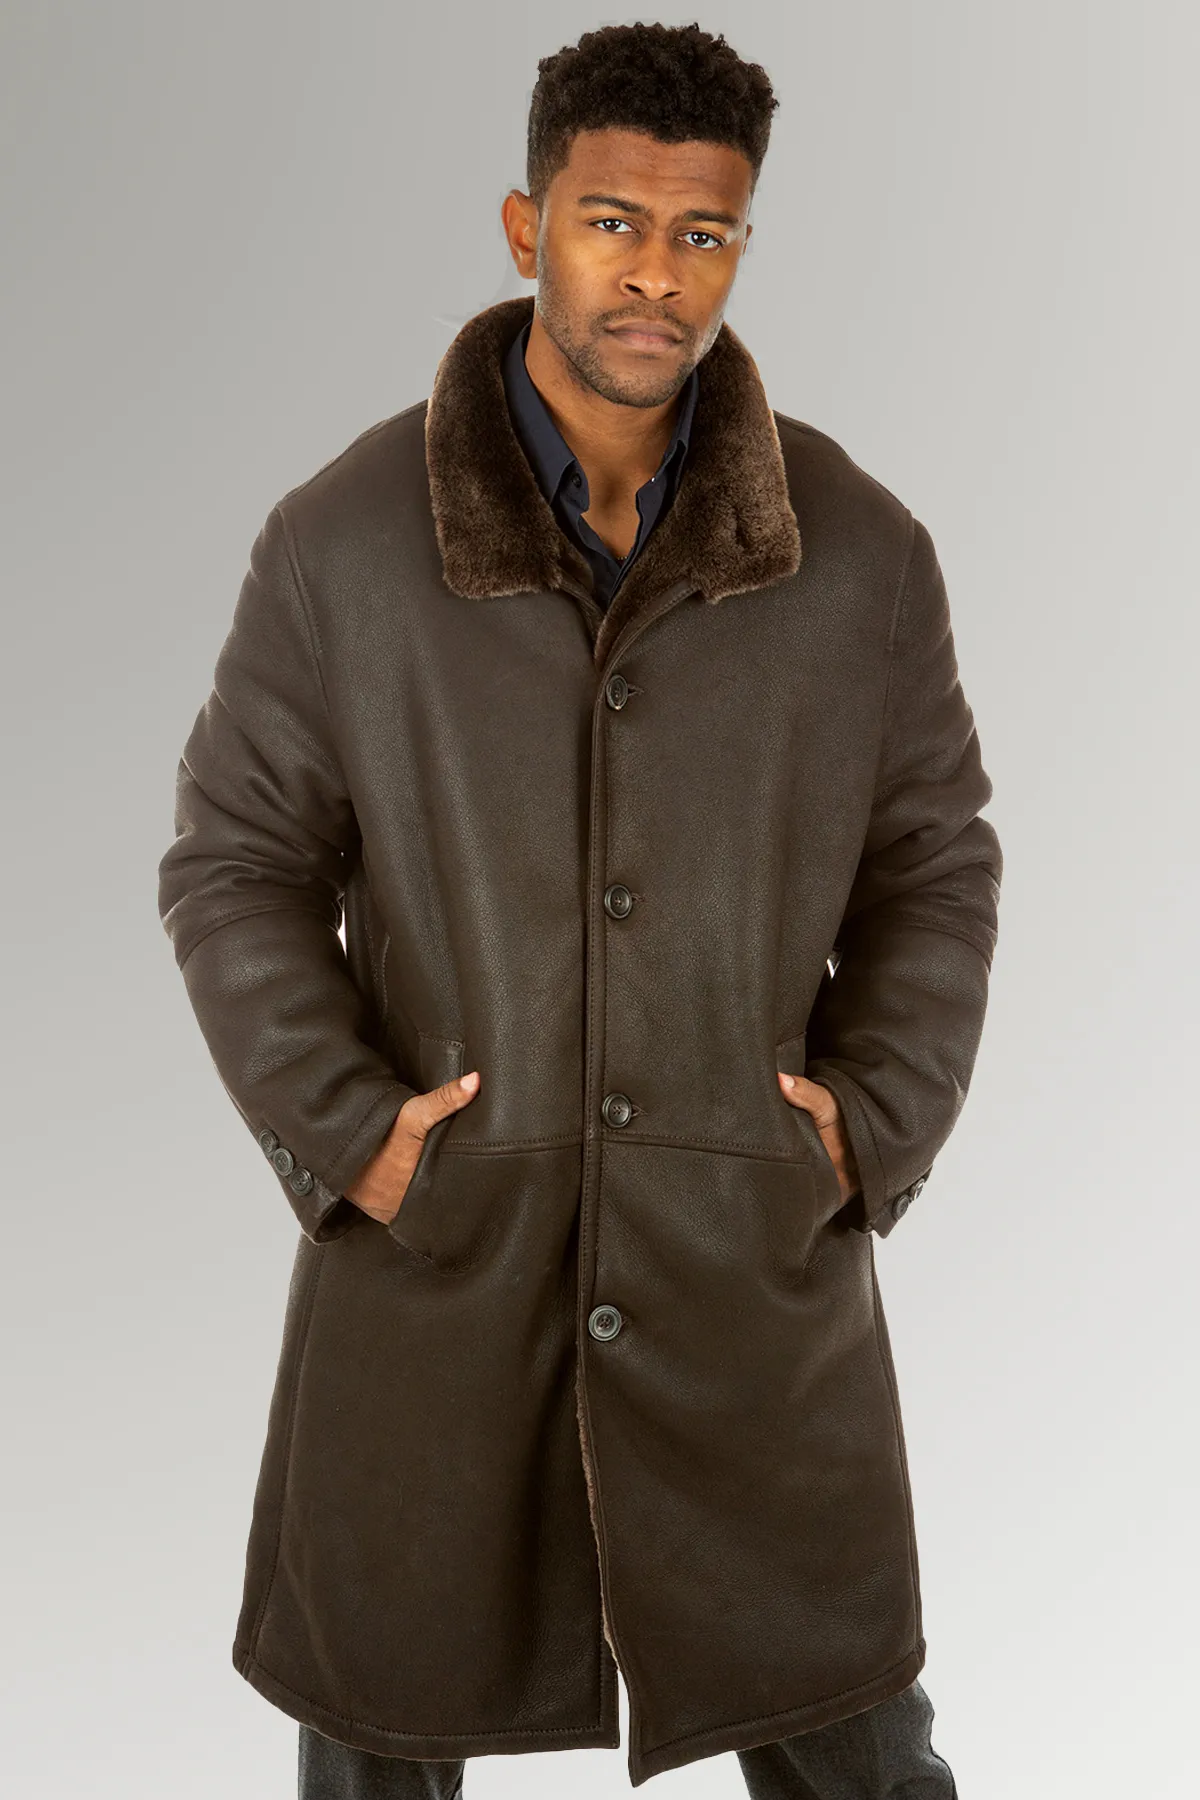 Men Shearling Brown Blazer Style Leather Coat | FREE SHIPPING